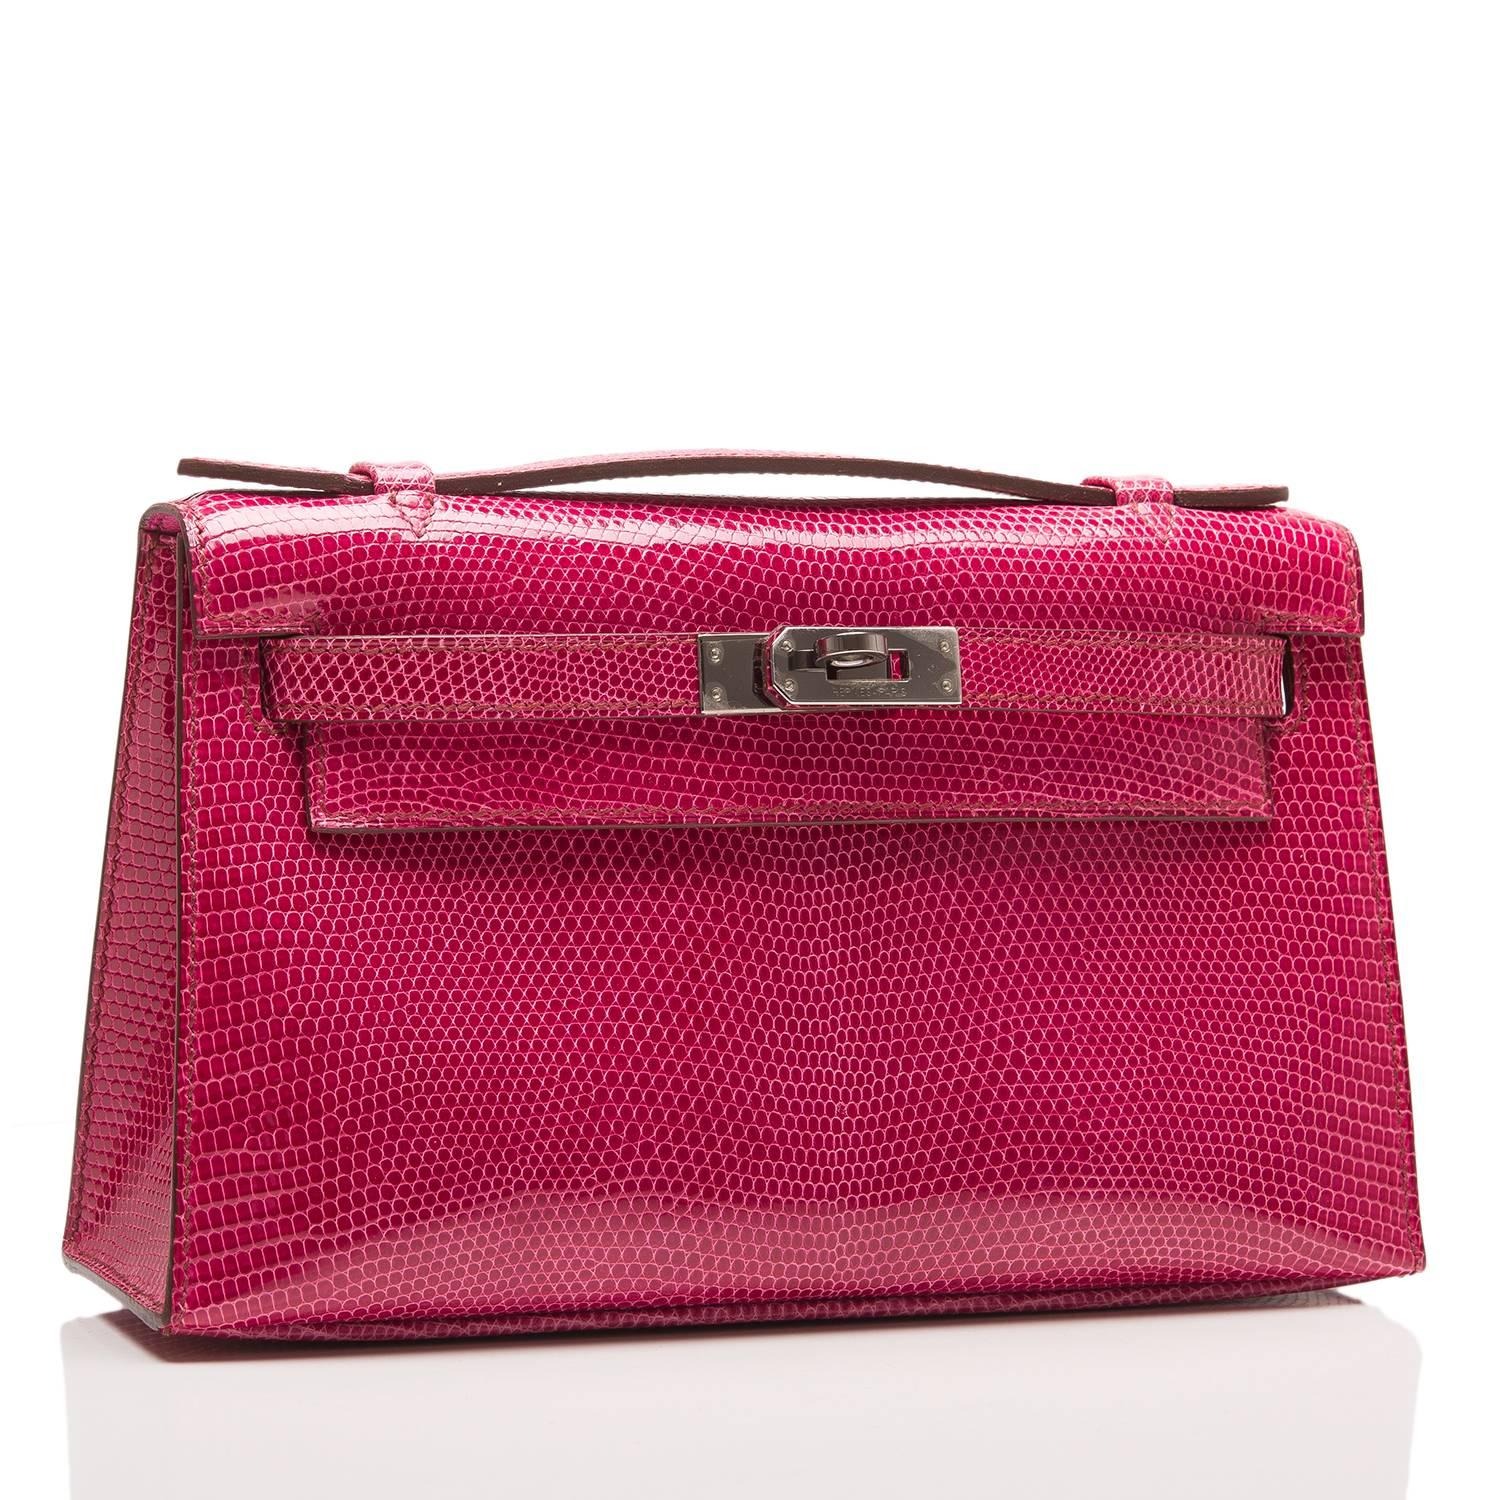  	
Hermes Fuchsia Lizard Mini Kelly Pochette clutch with palladium hardware.

This Hermes Kelly Pochette features tonal stitching, a front flap with two straps, toggle closure and single flat handle.

The interior is lined in Fuchsia H chevre